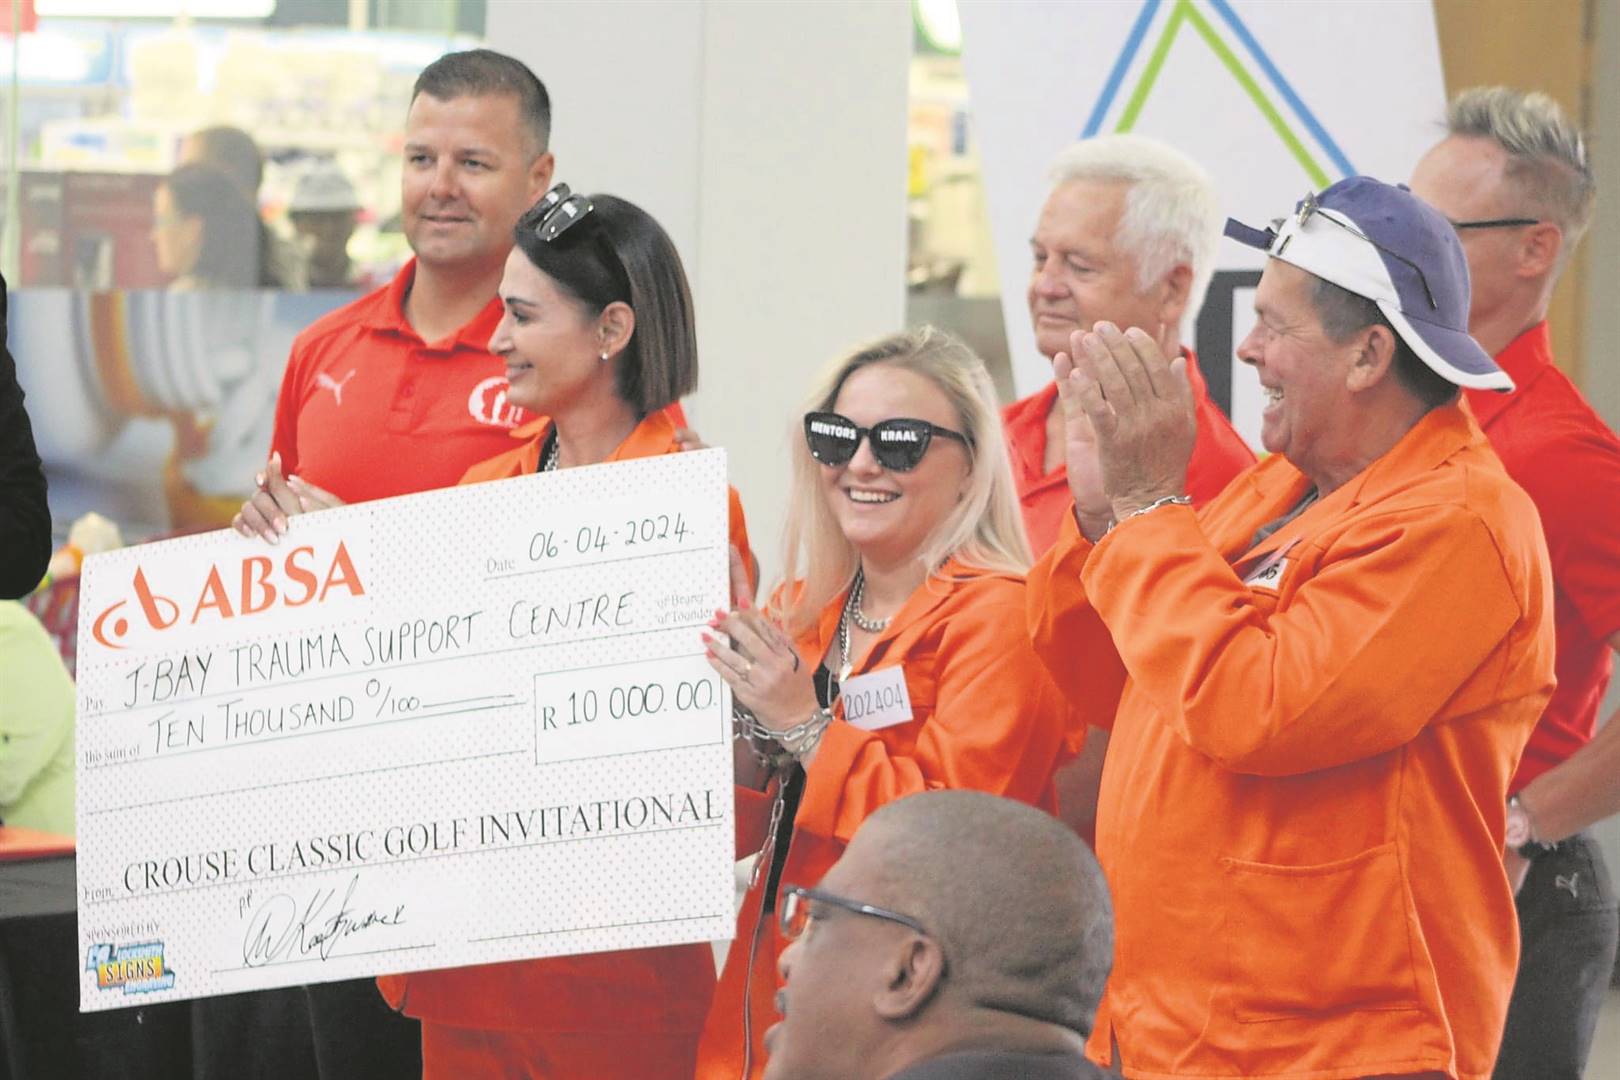 Nearly R26 000 raised in support of the J-Bay Trauma Support Centre’s vital work.              